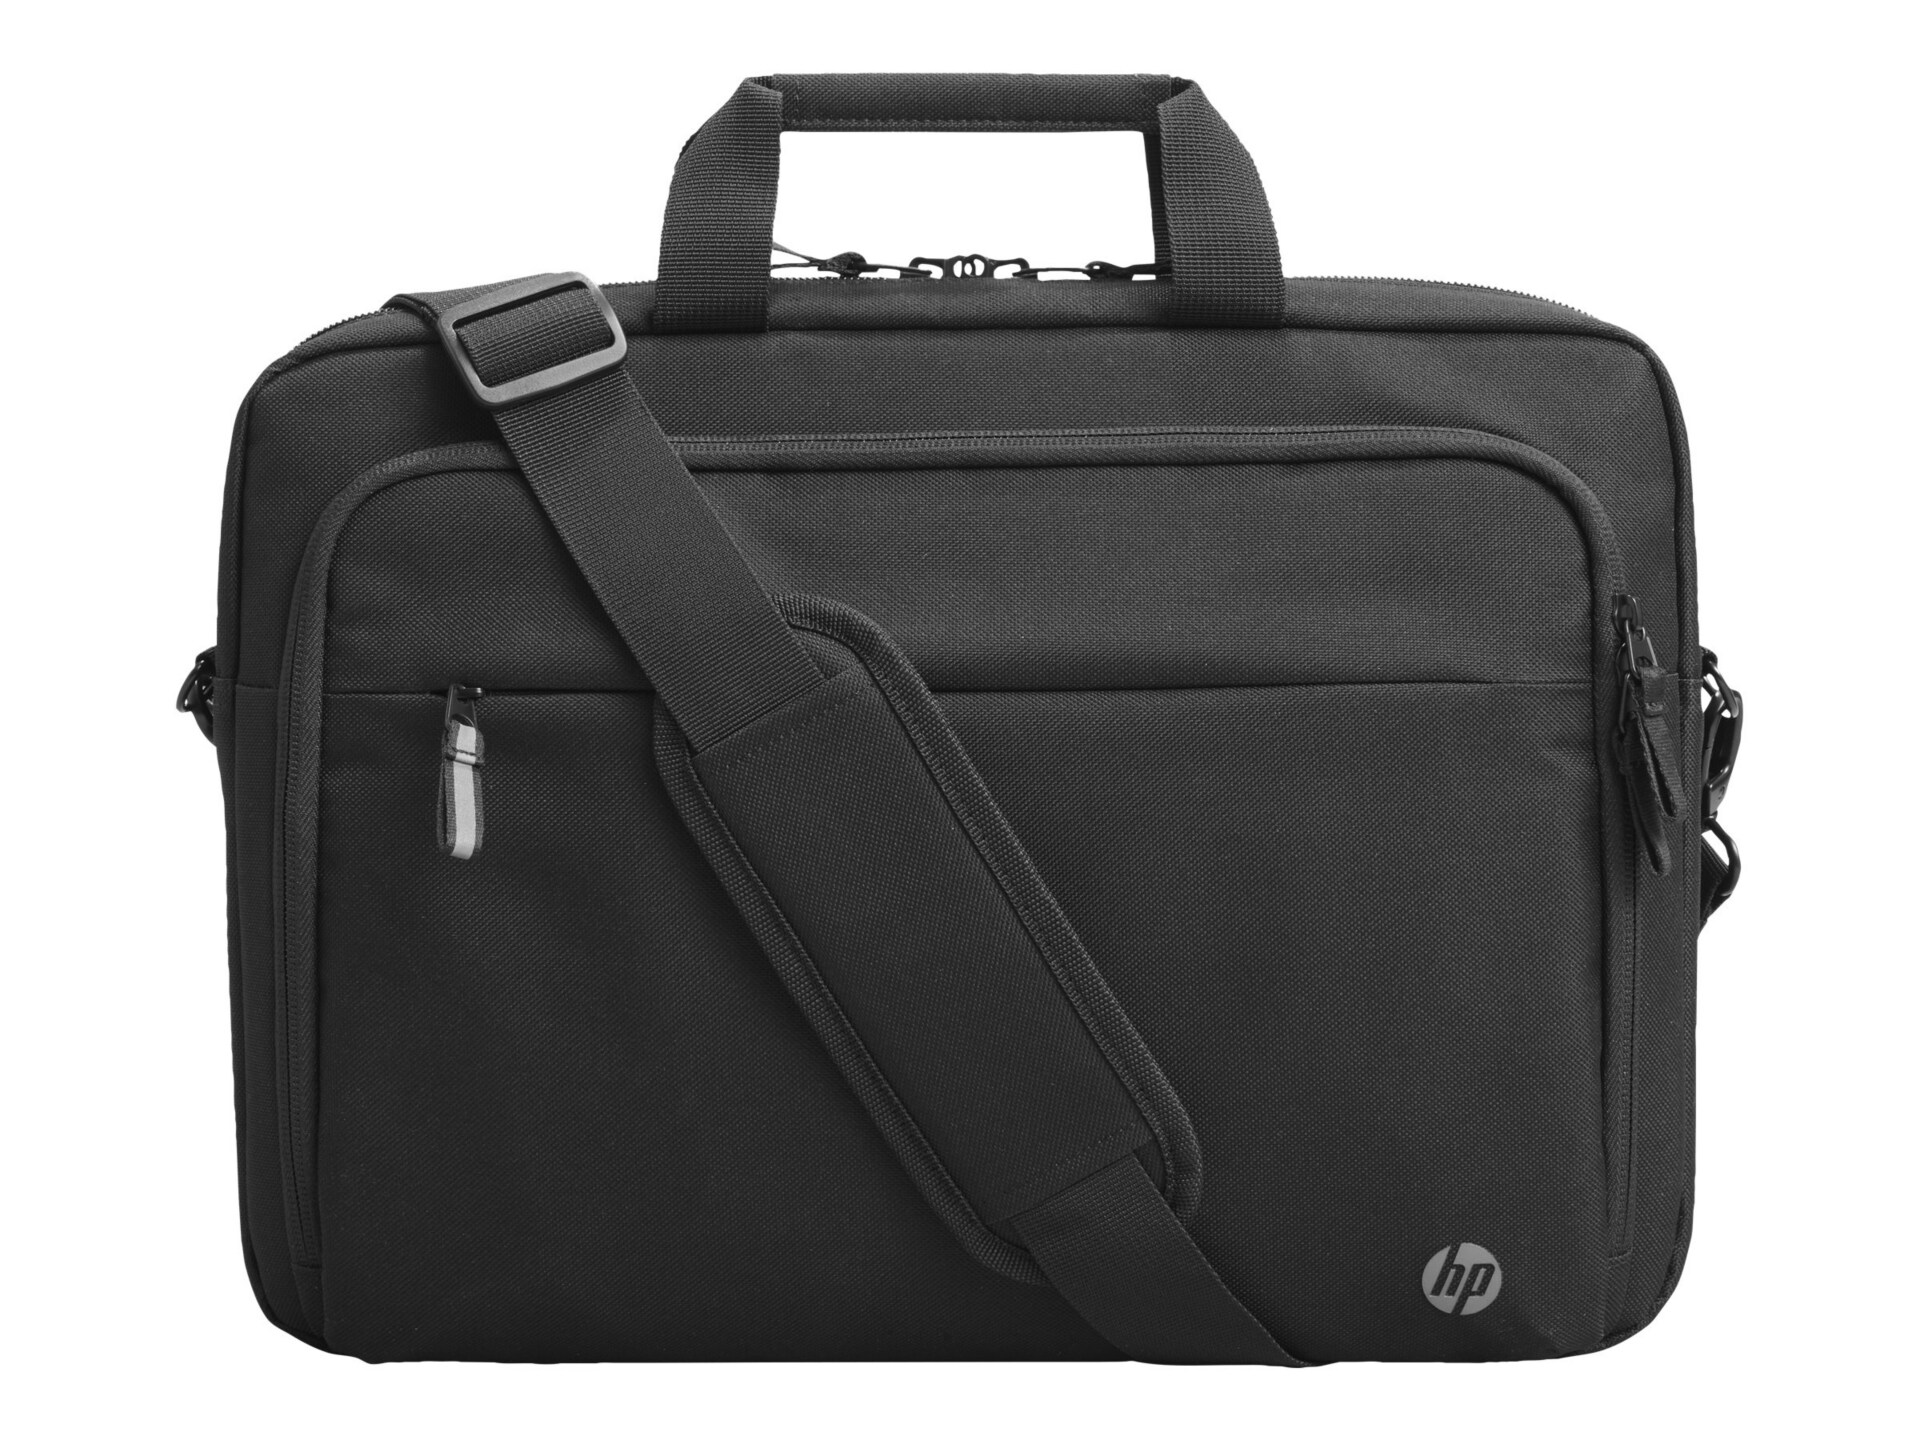 HP Renew Carrying Case (Sleeve) for 14.1" to 15.6" Notebook